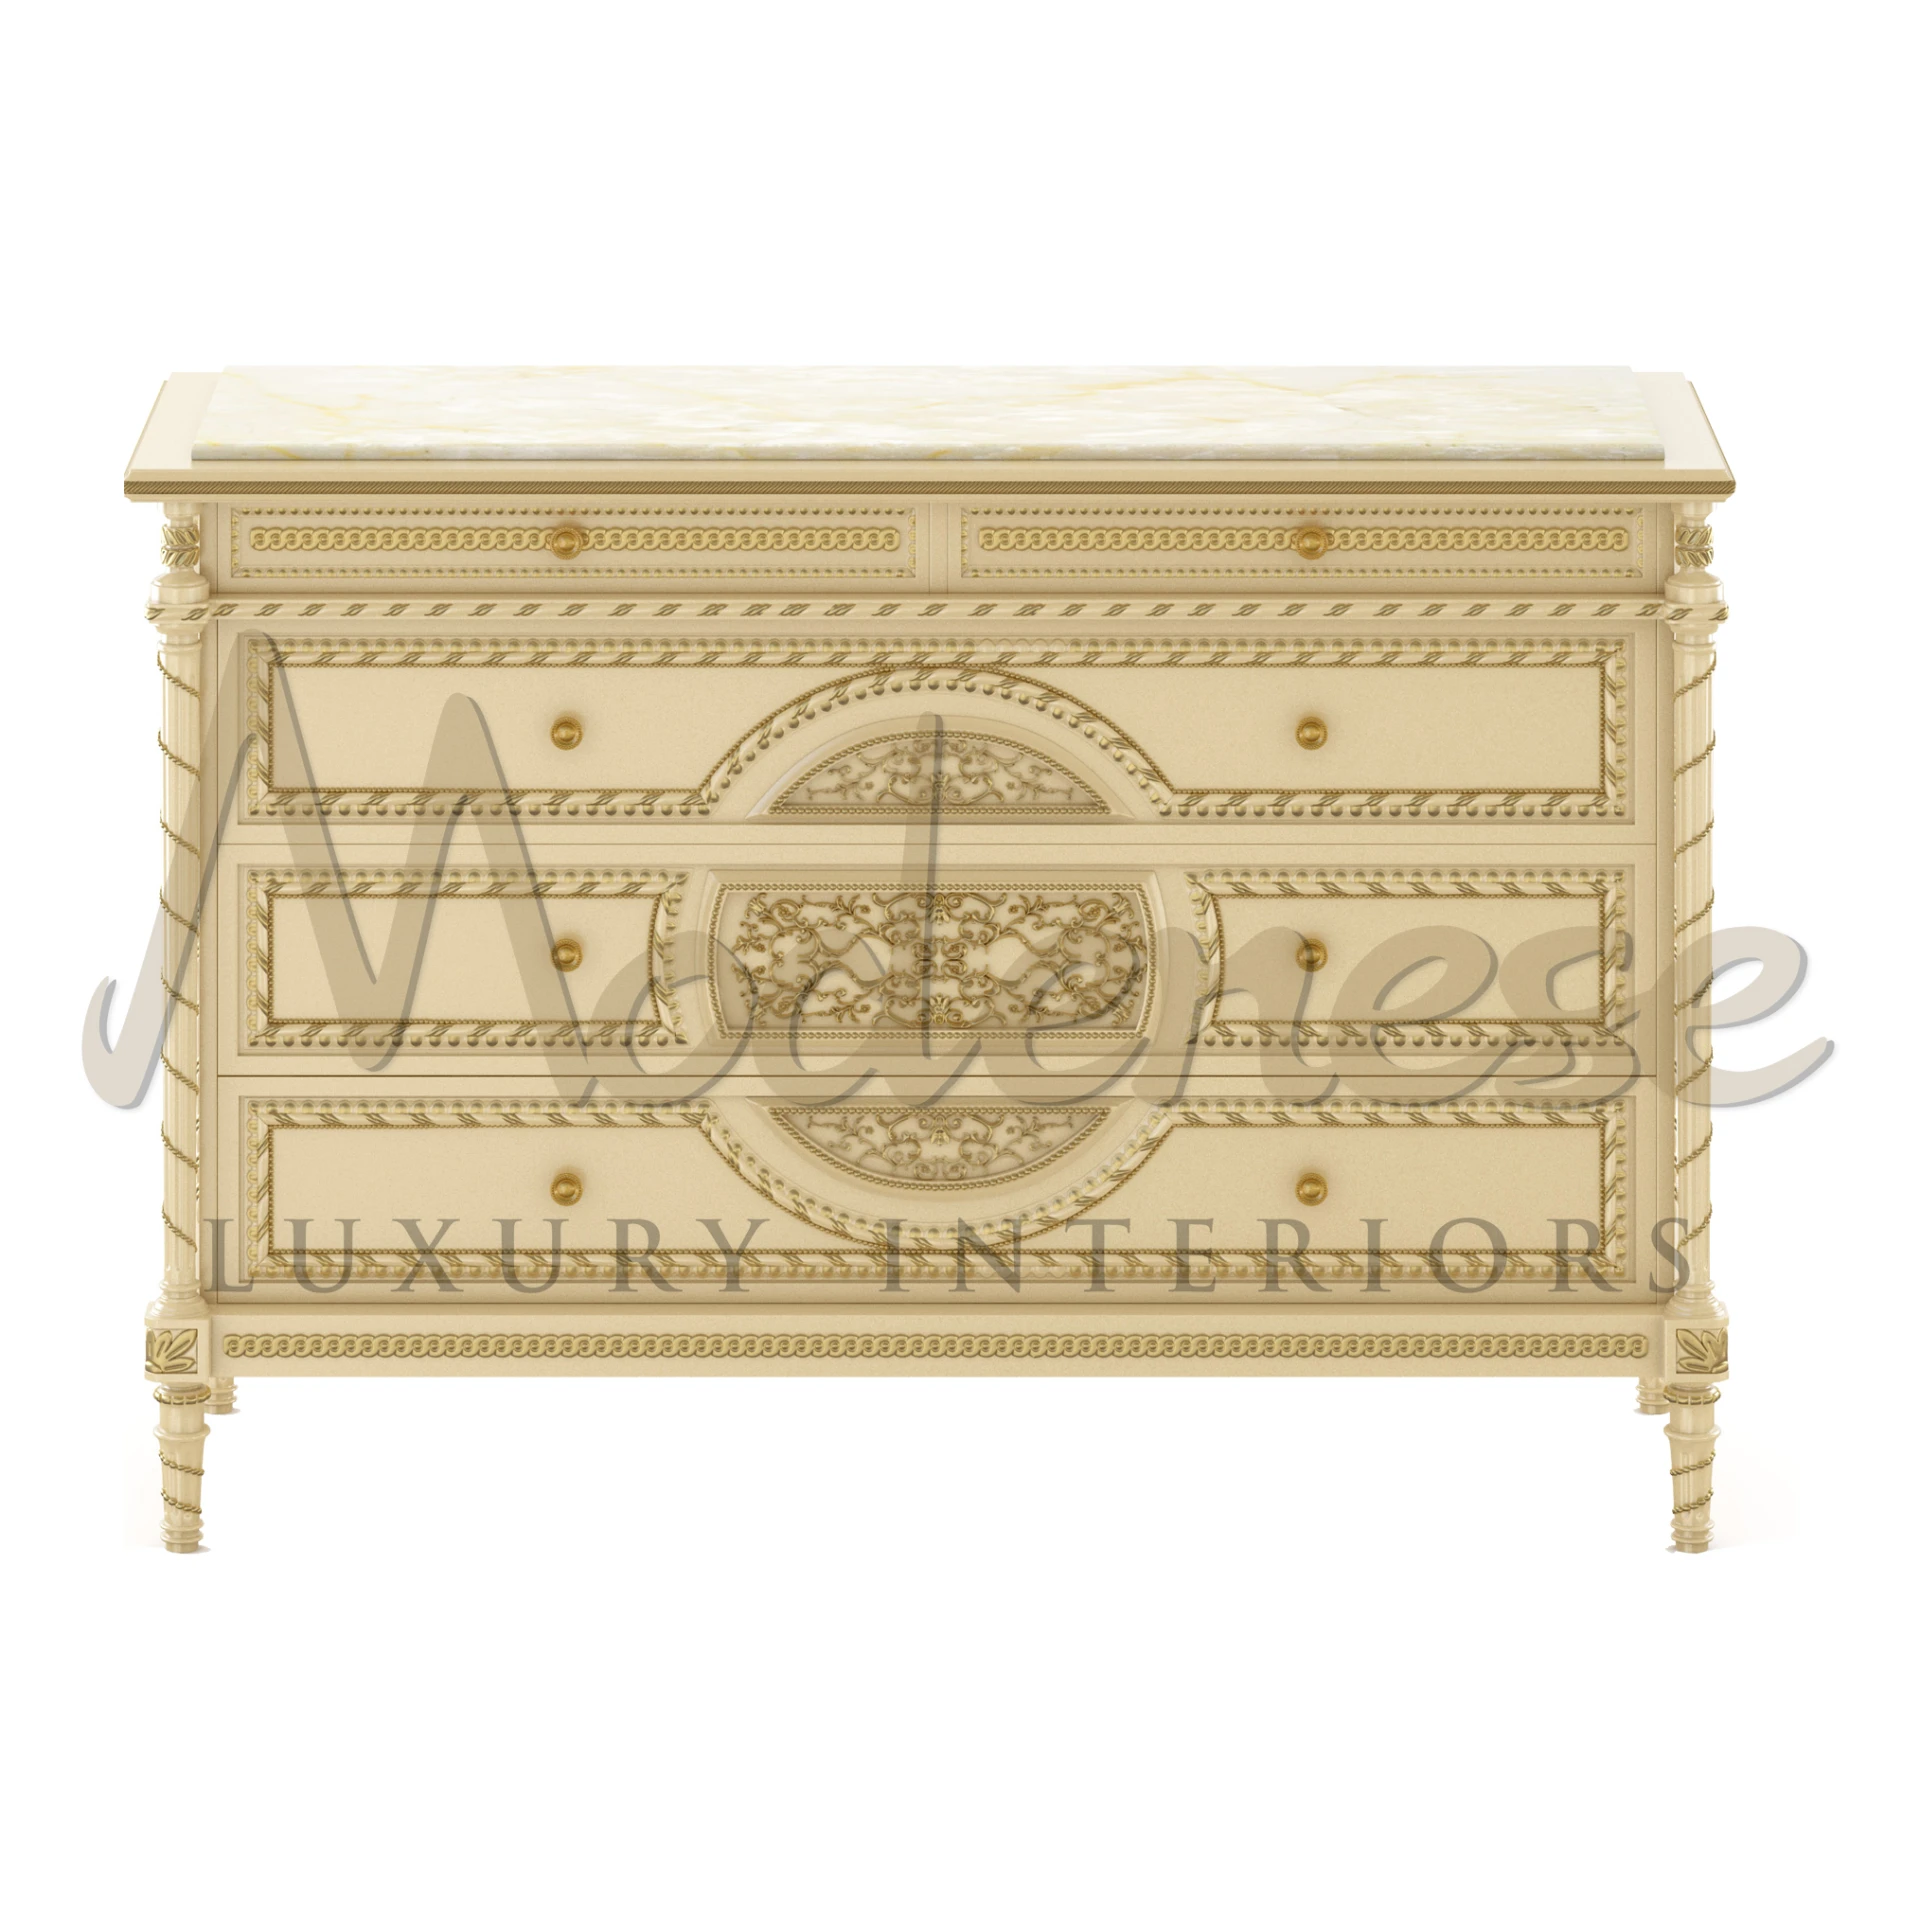 Ivory-colored classical  wooden chest with elaborate carvings and a smooth marble top surface by Modenese Luxury Interiors Manufacturer